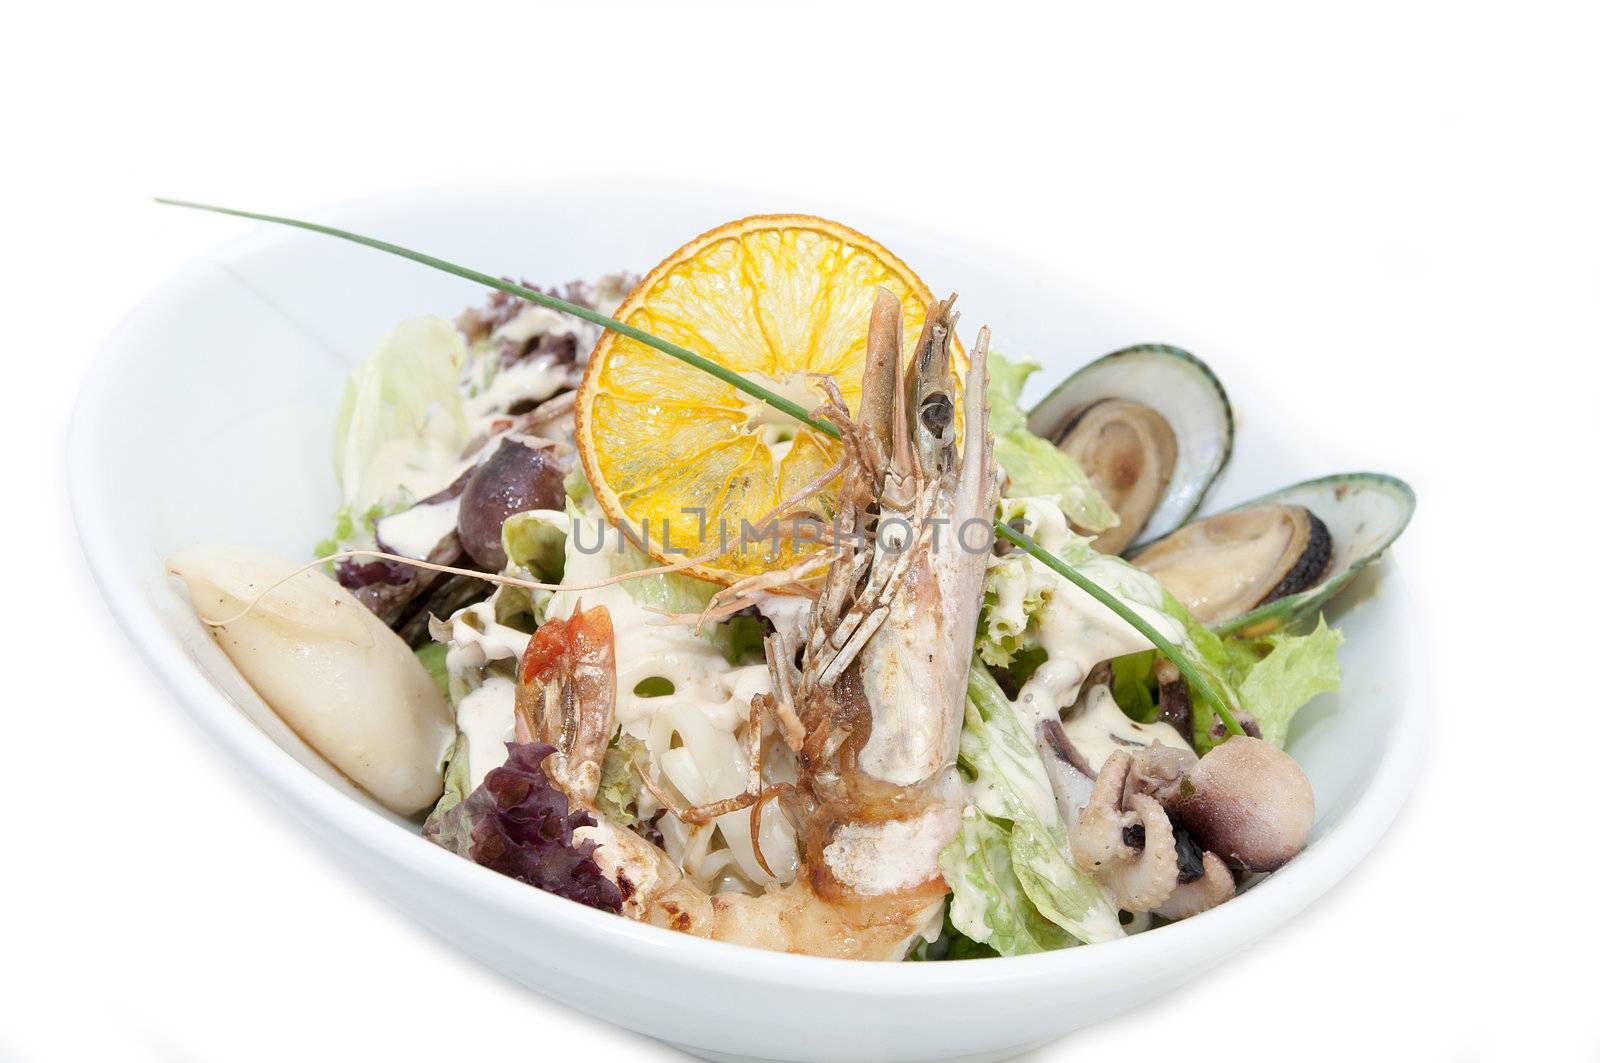 salad with seafood by Lester120